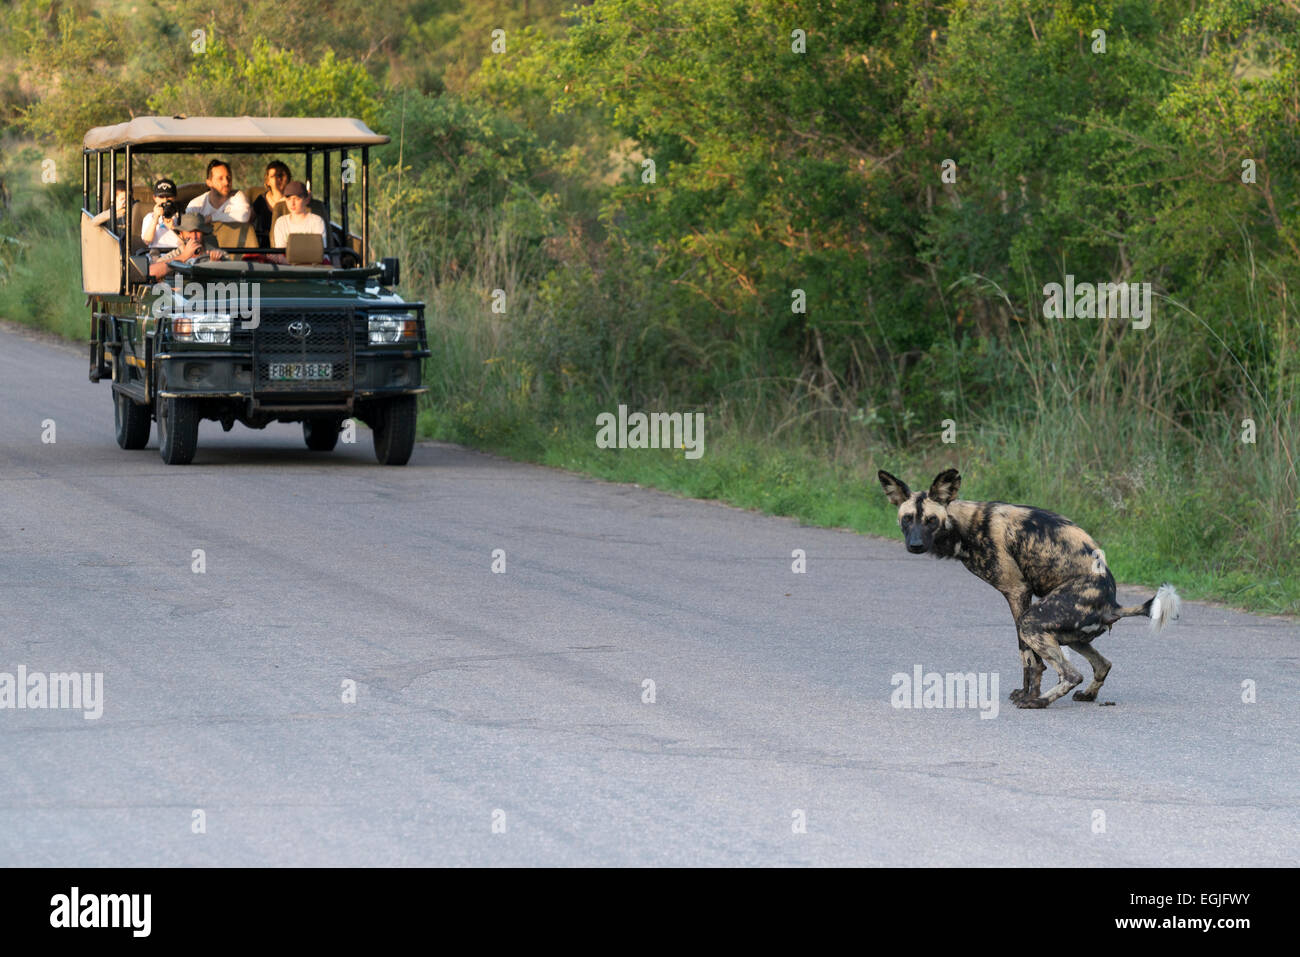 African wild dog (Lycaon pictus) defecating on a road, toursits watching from a jeep, Kruger National Park, South Africa Stock Photo